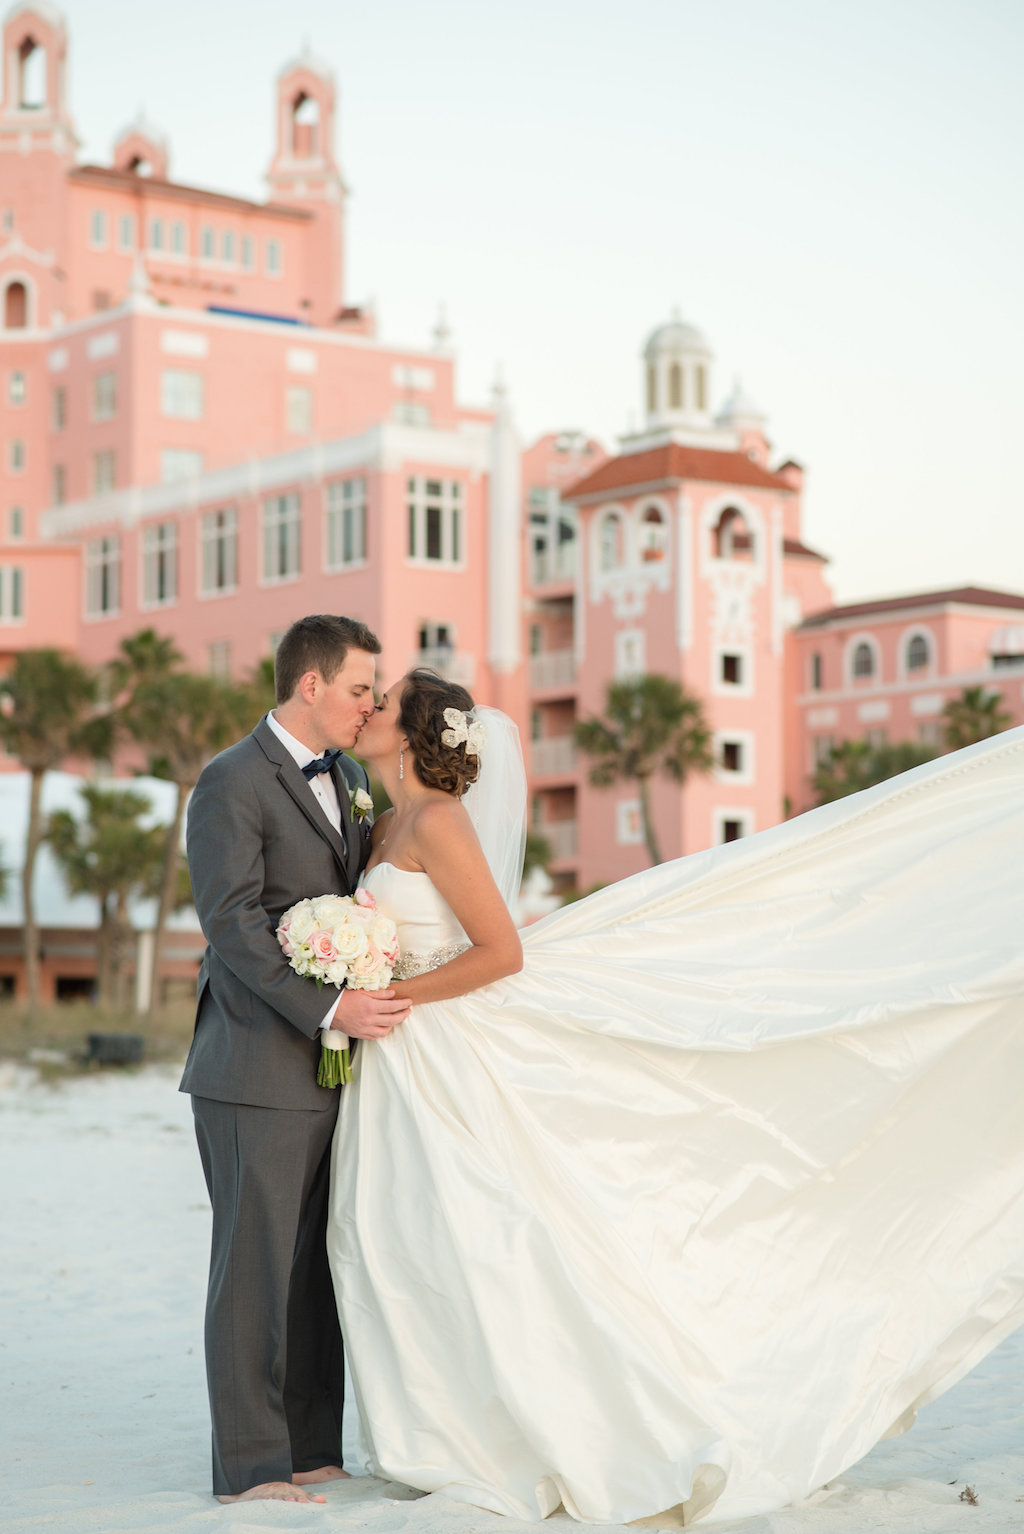 Outdoor Beach Wedding Portrait with Pink and White Bouquet, Groom in Gray Suit | St Petersburg Florida Wedding Venue The Don Cesar | Tampa Bay Wedding Photographer Caroline and Evan Photography